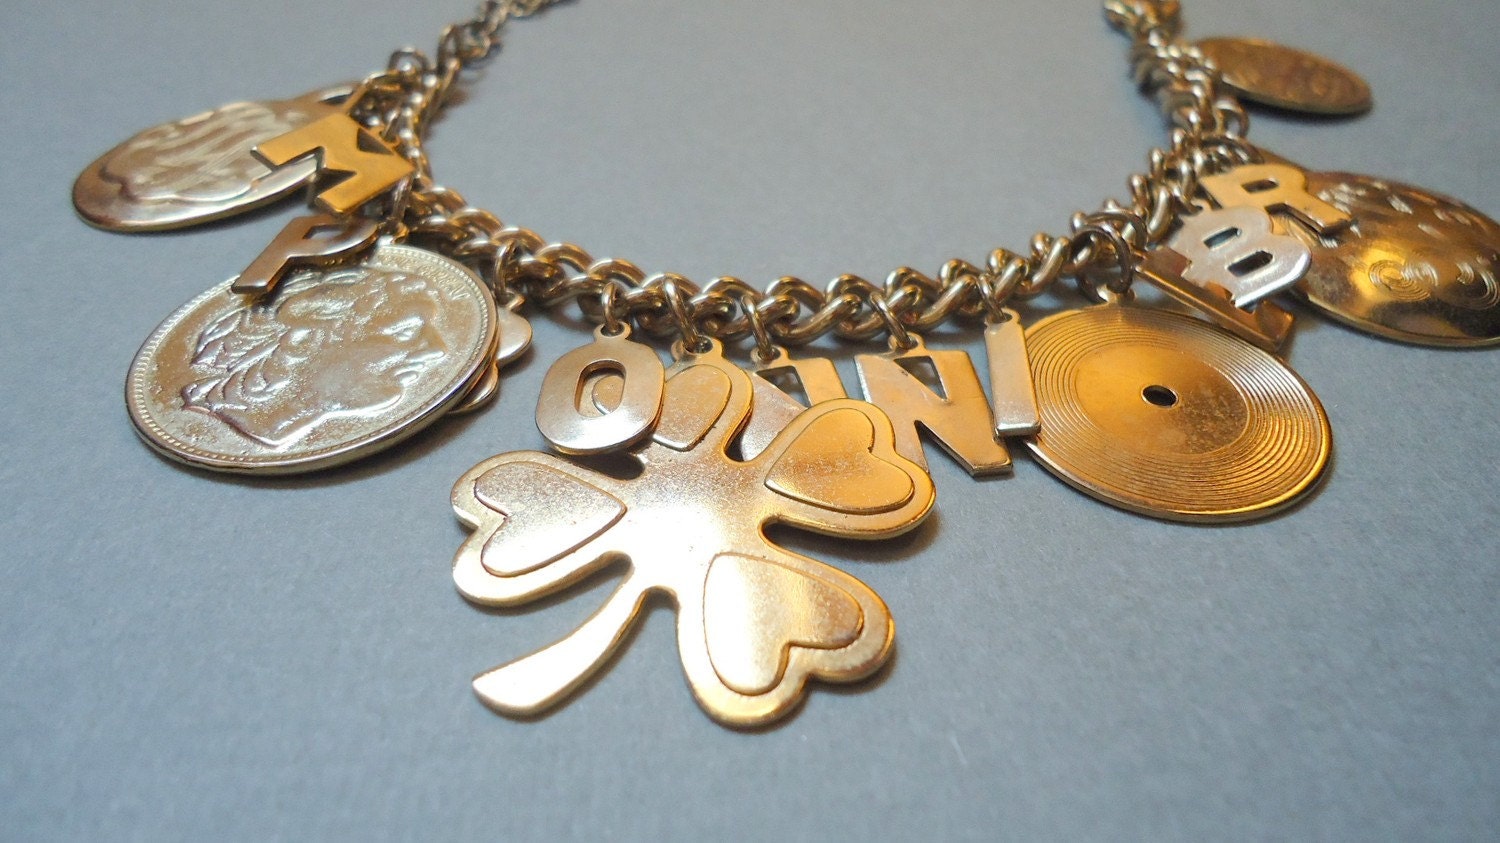 Vintage Charm Bracelet with Various Gold Charms